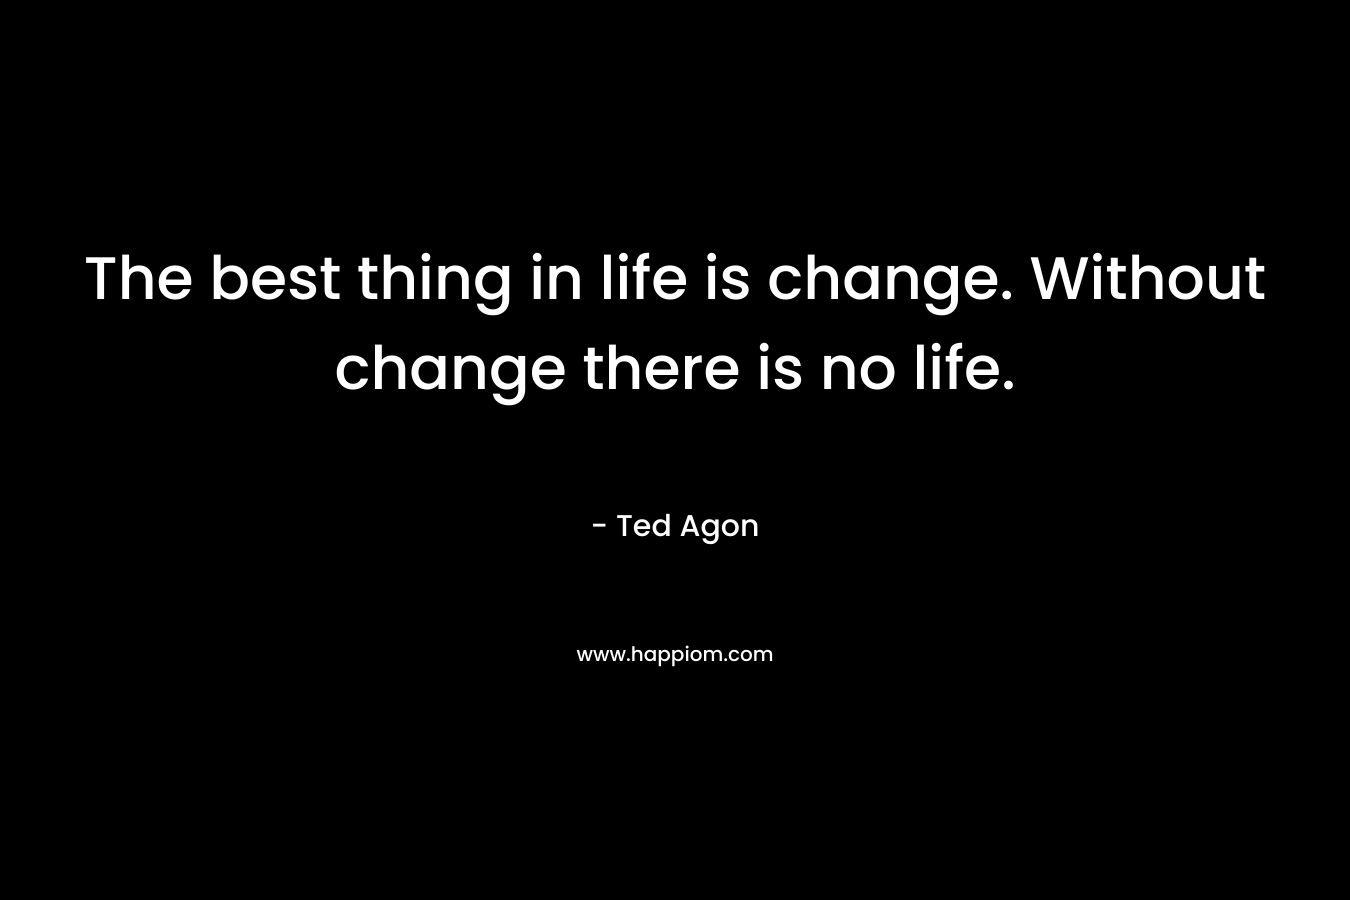 The best thing in life is change. Without change there is no life.